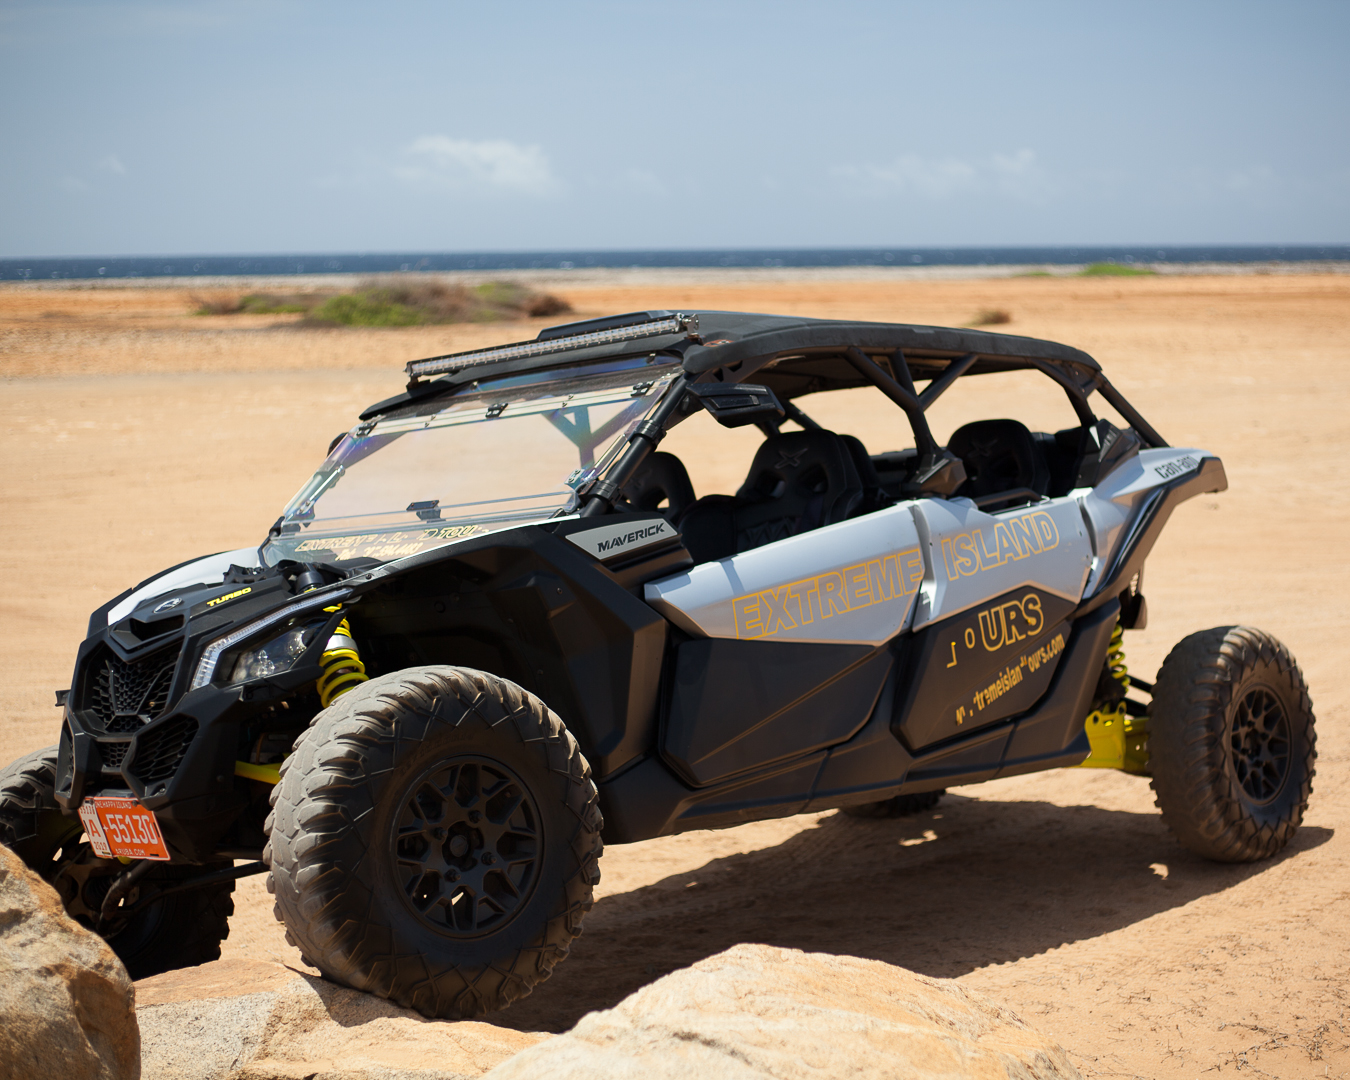 75 SEATER CAN AM TOUR BY XTREME  Aruba - Vacationstore.net